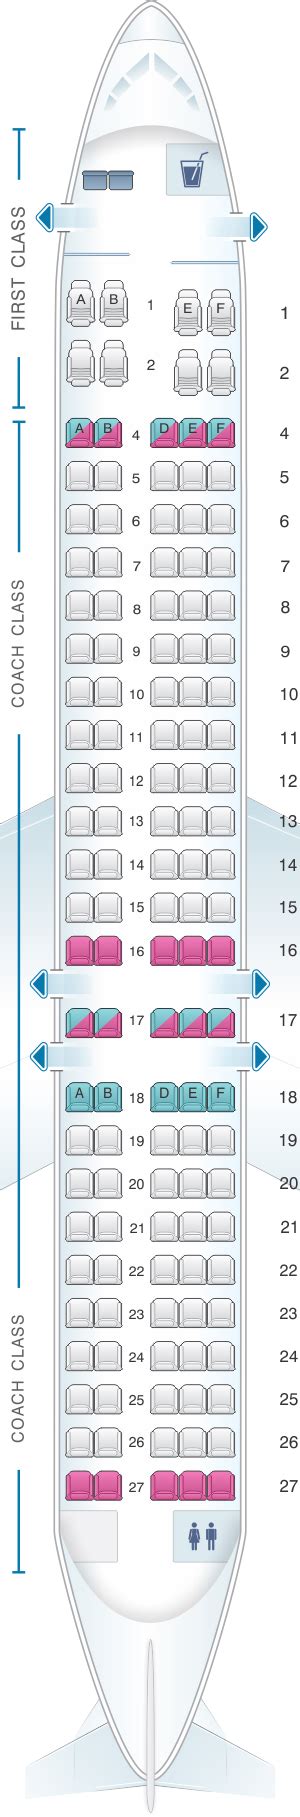 Hawaiian Airlines Seating Chart Boeing Hawaiian Airlines Hot Sex Picture